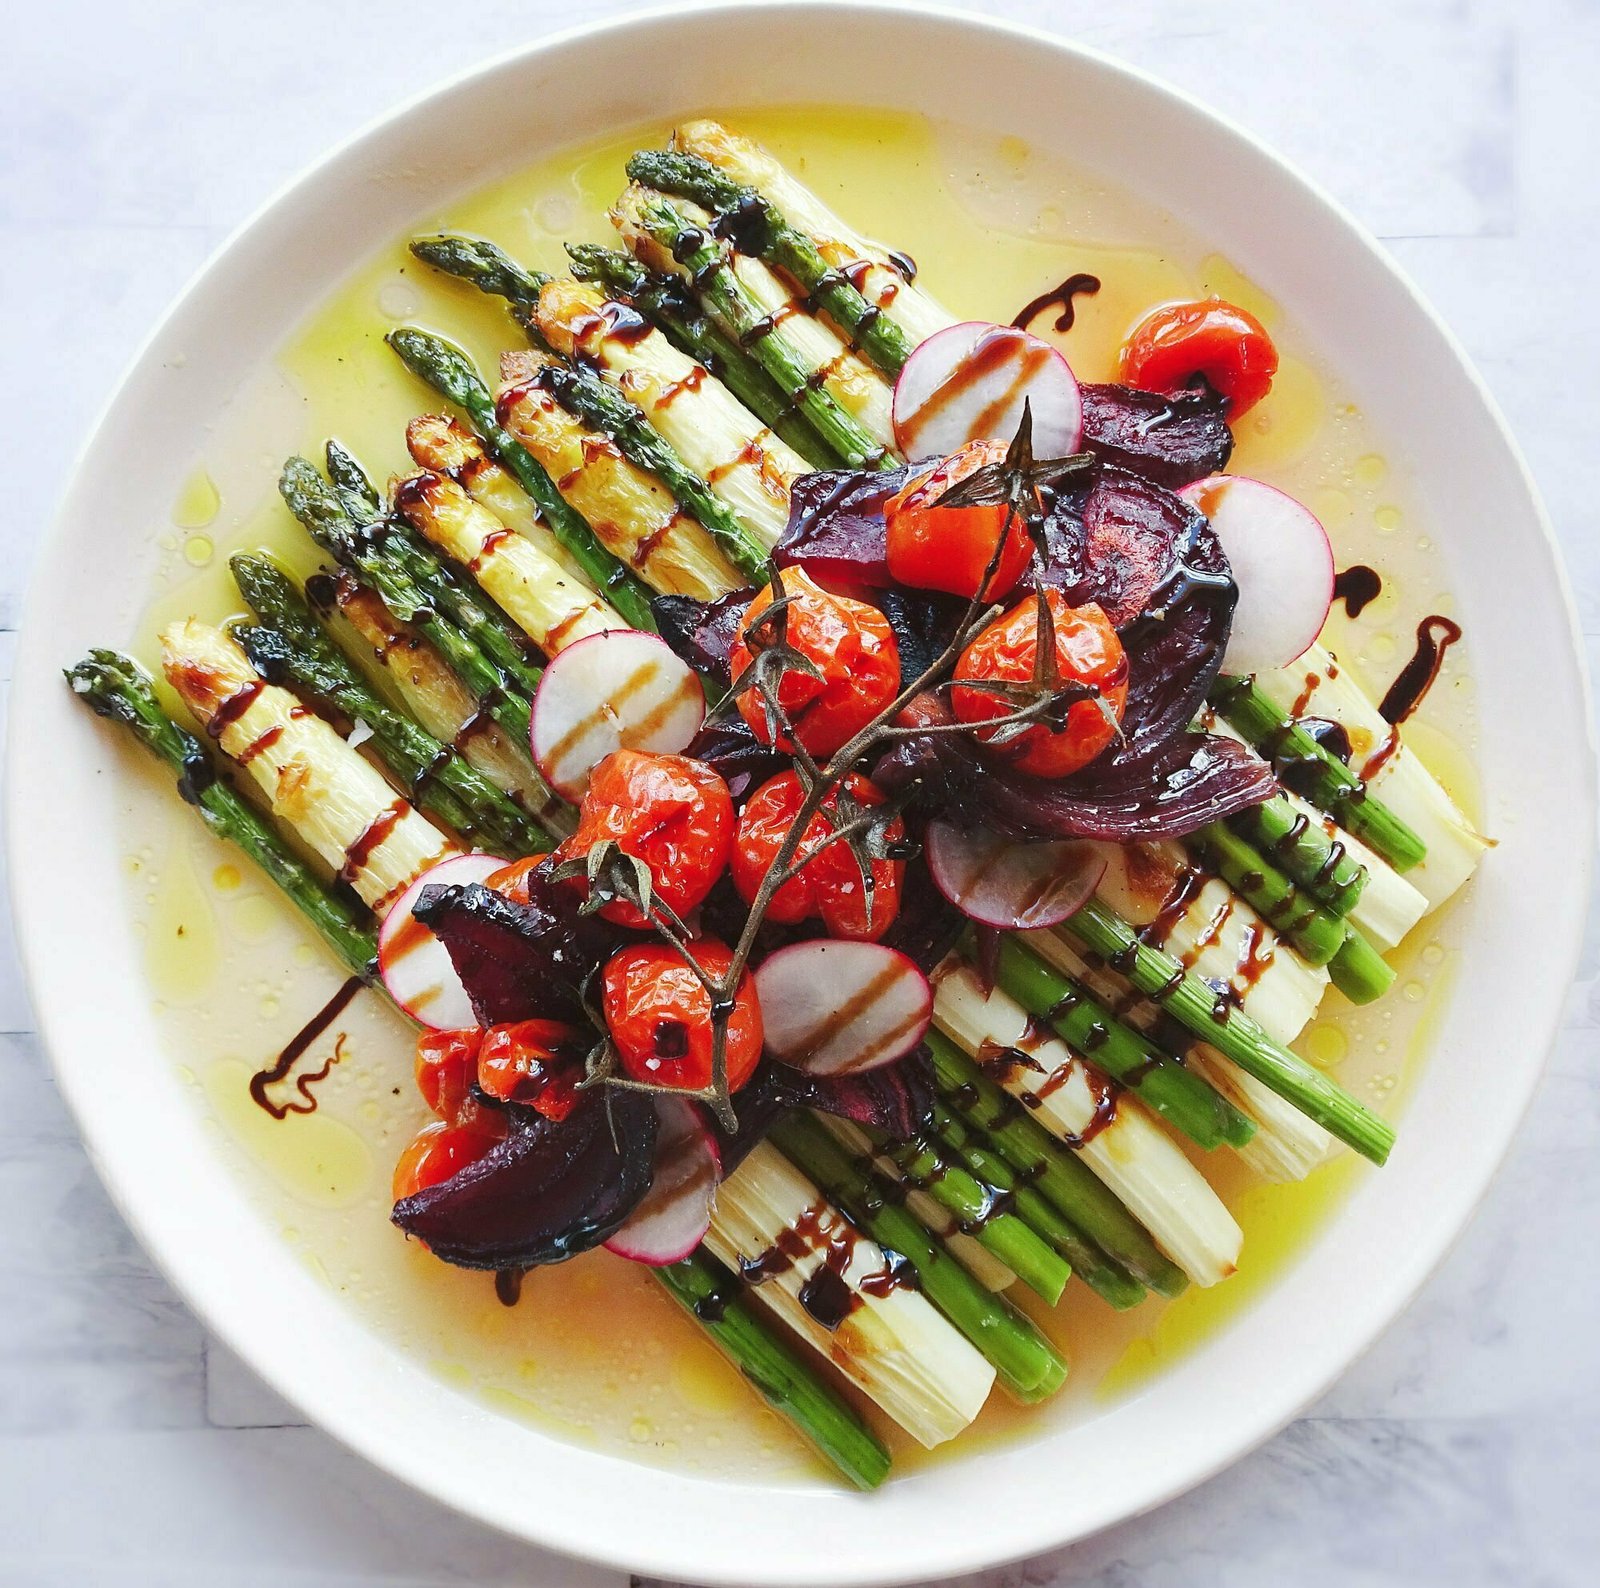 a large platter of roasted vegetables sits on a bed of roasted green and white asparagus